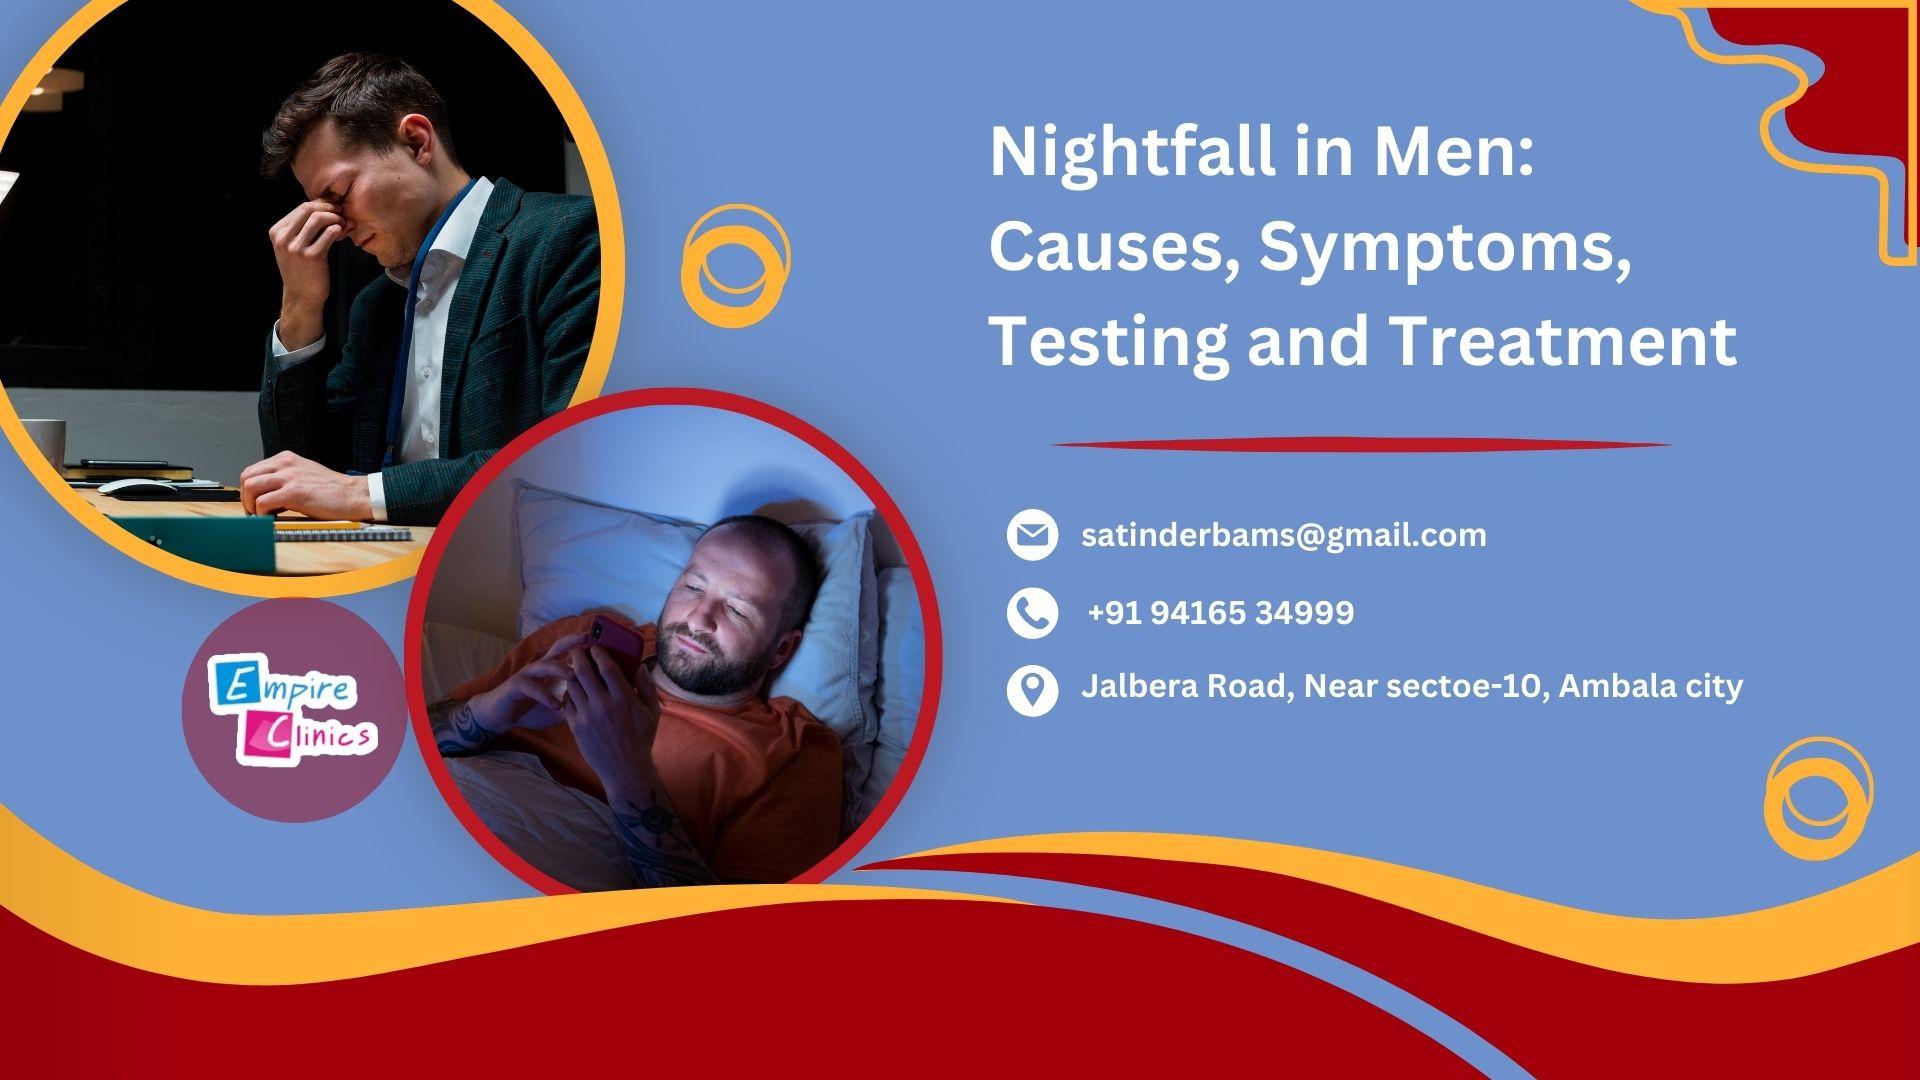 nightfall-in-men-causes-symptoms-testing-and-treatment